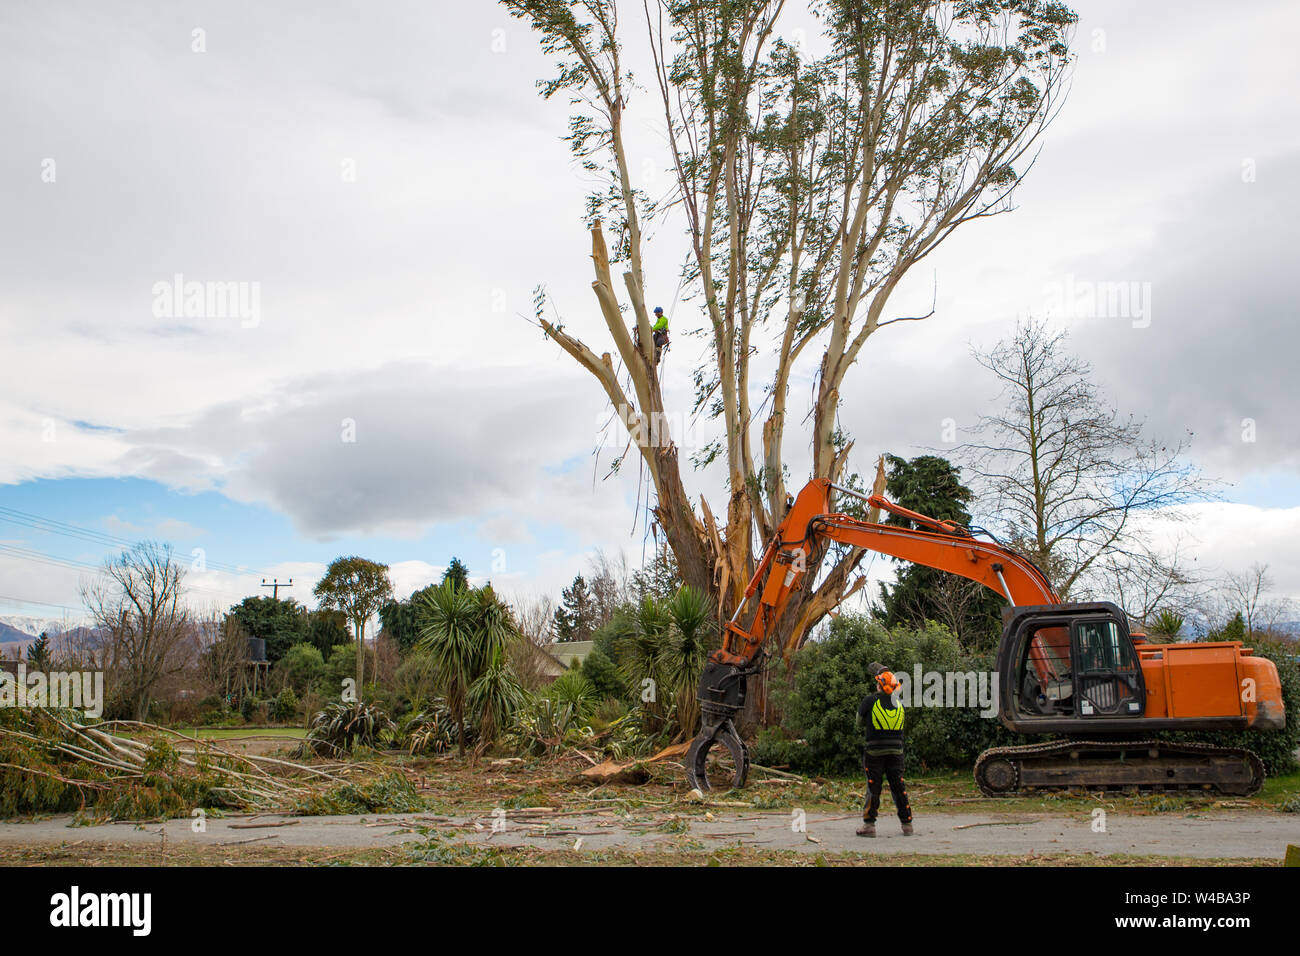 Sheffield, Canterbury, New Zealand, July 10 2019: An arborist works high in a eucalyptus tree pruning branches in collaboration with the digger and lo Stock Photo